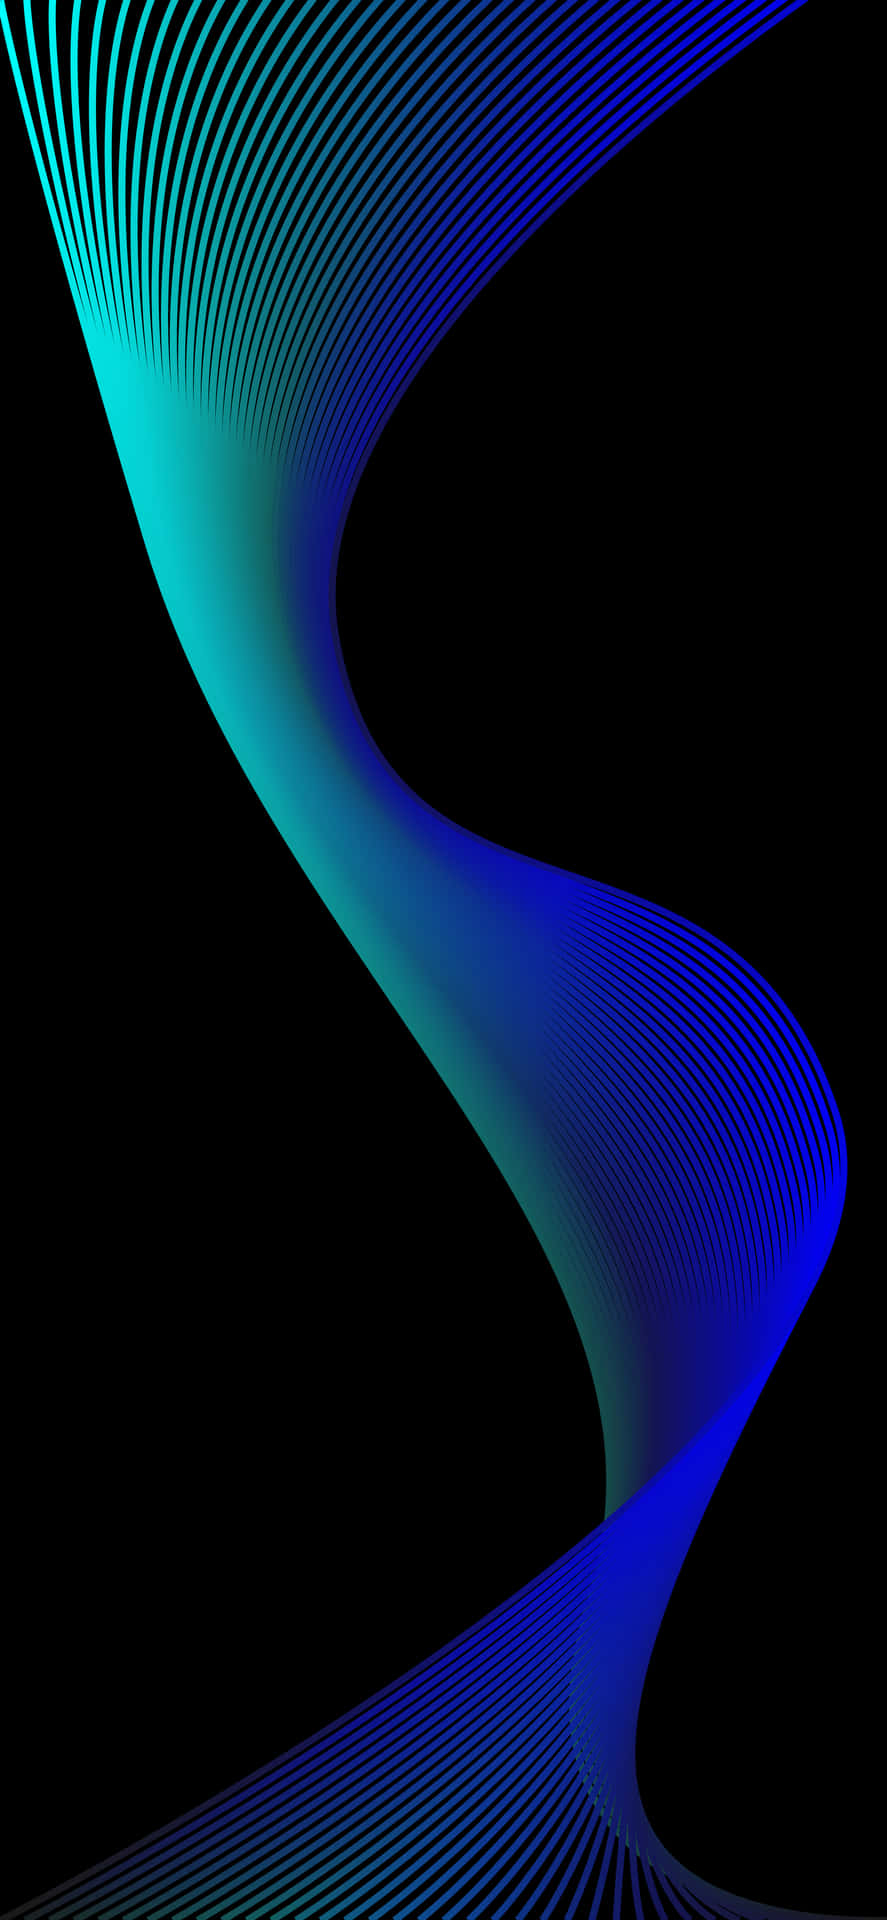 Bright and Colorful OLED Display Wallpaper